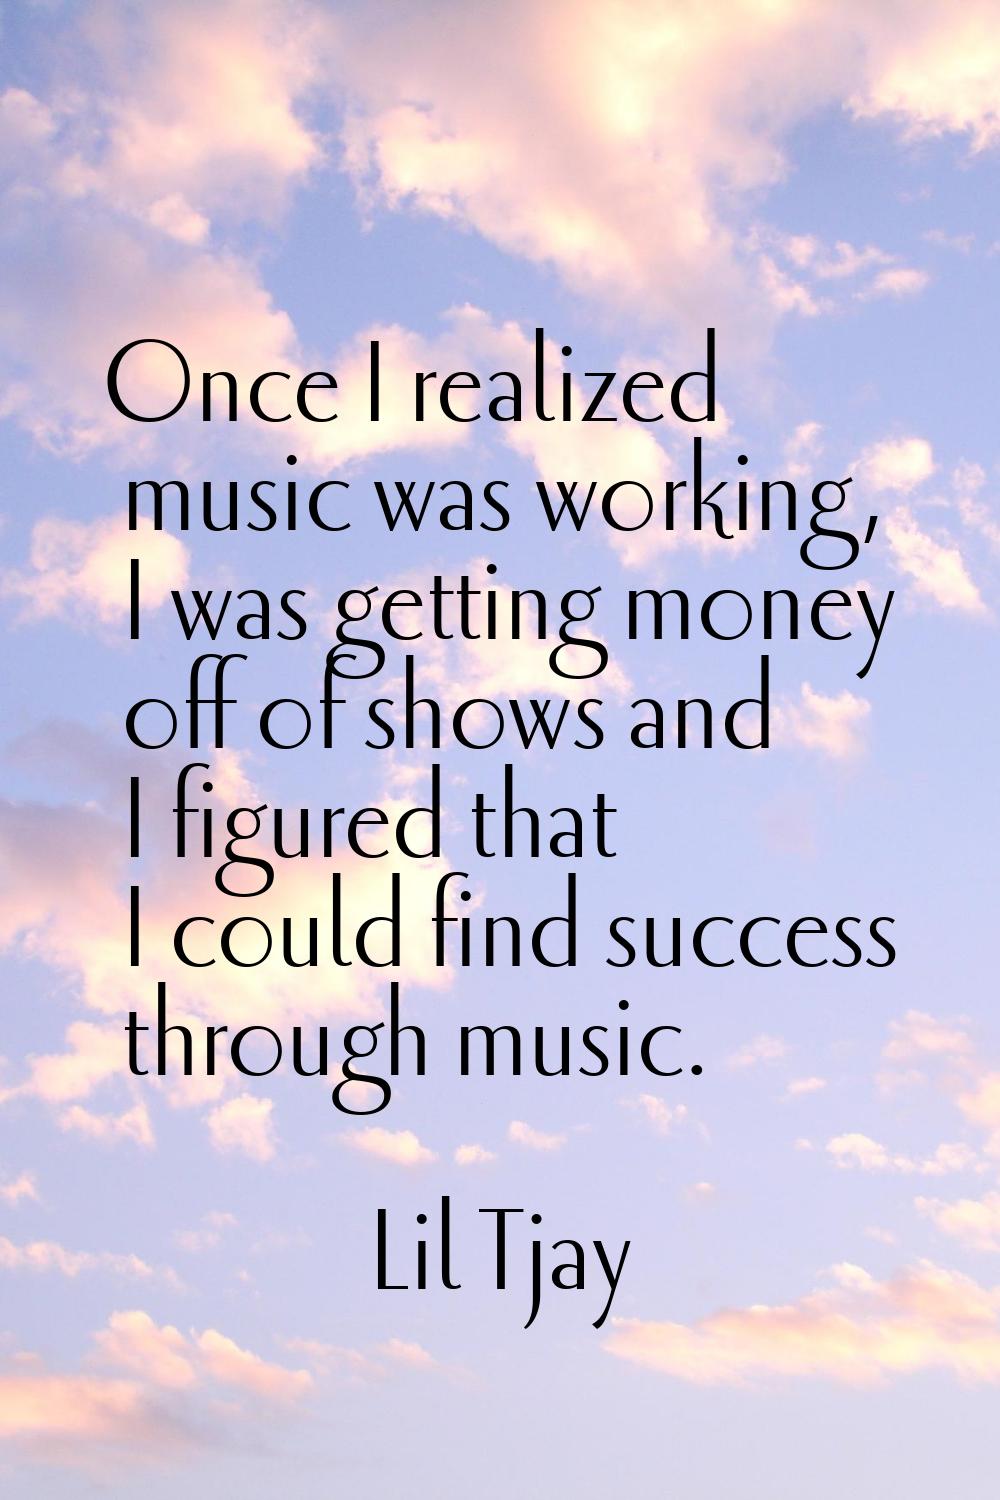 Once I realized music was working, I was getting money off of shows and I figured that I could find